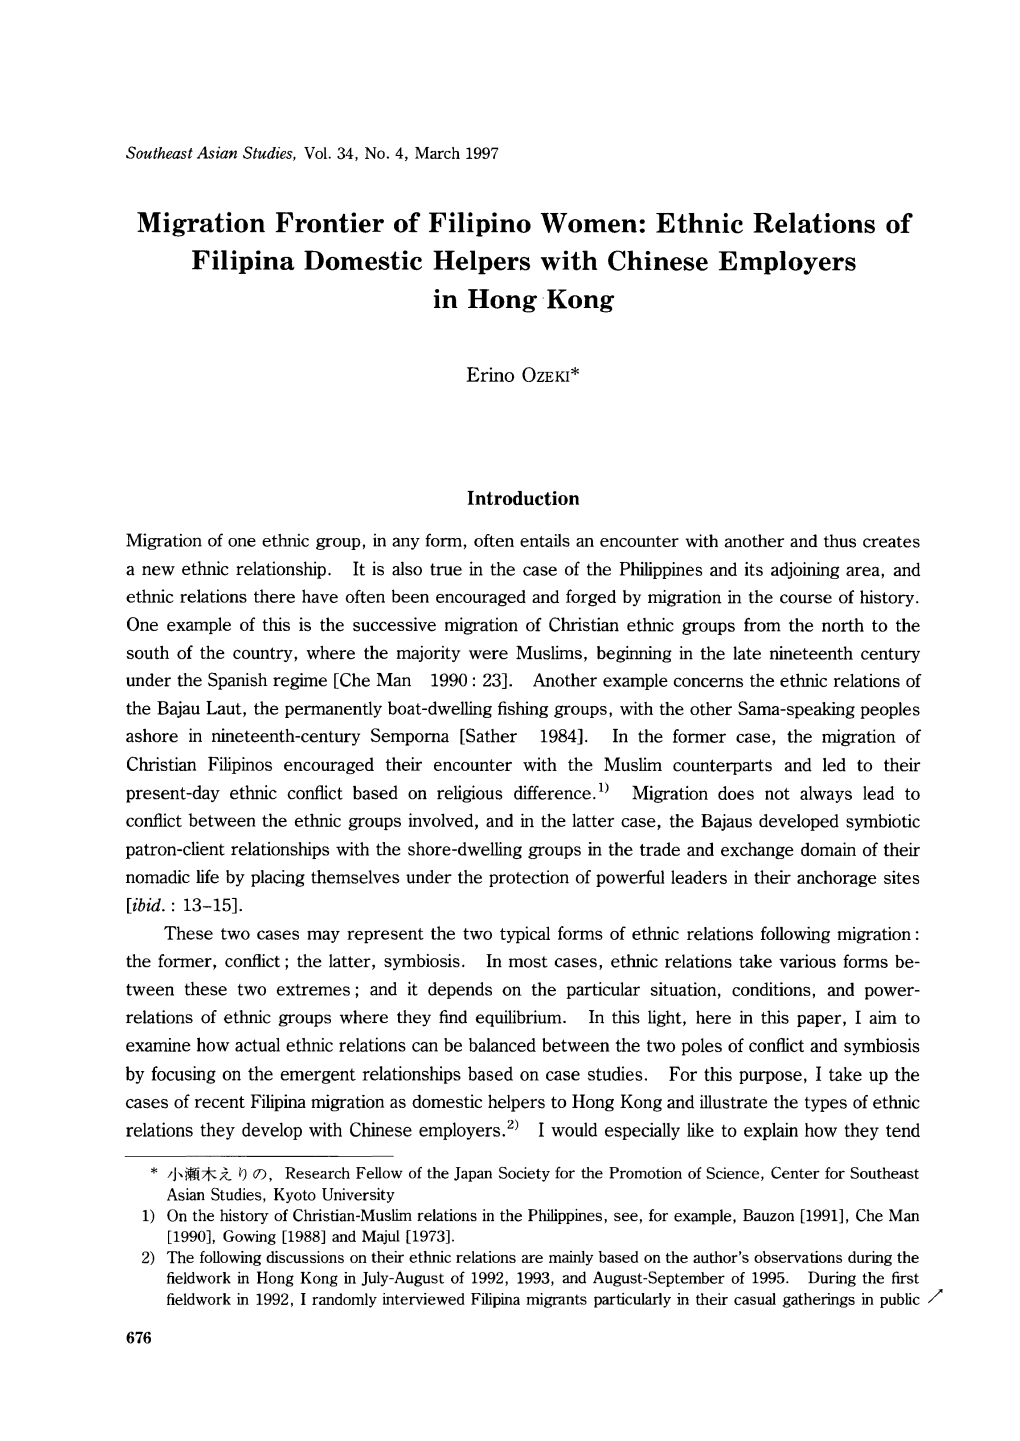 Ethnic Relations of Filipina Domestic Helpers with Chinese Employers in Hong·Kong